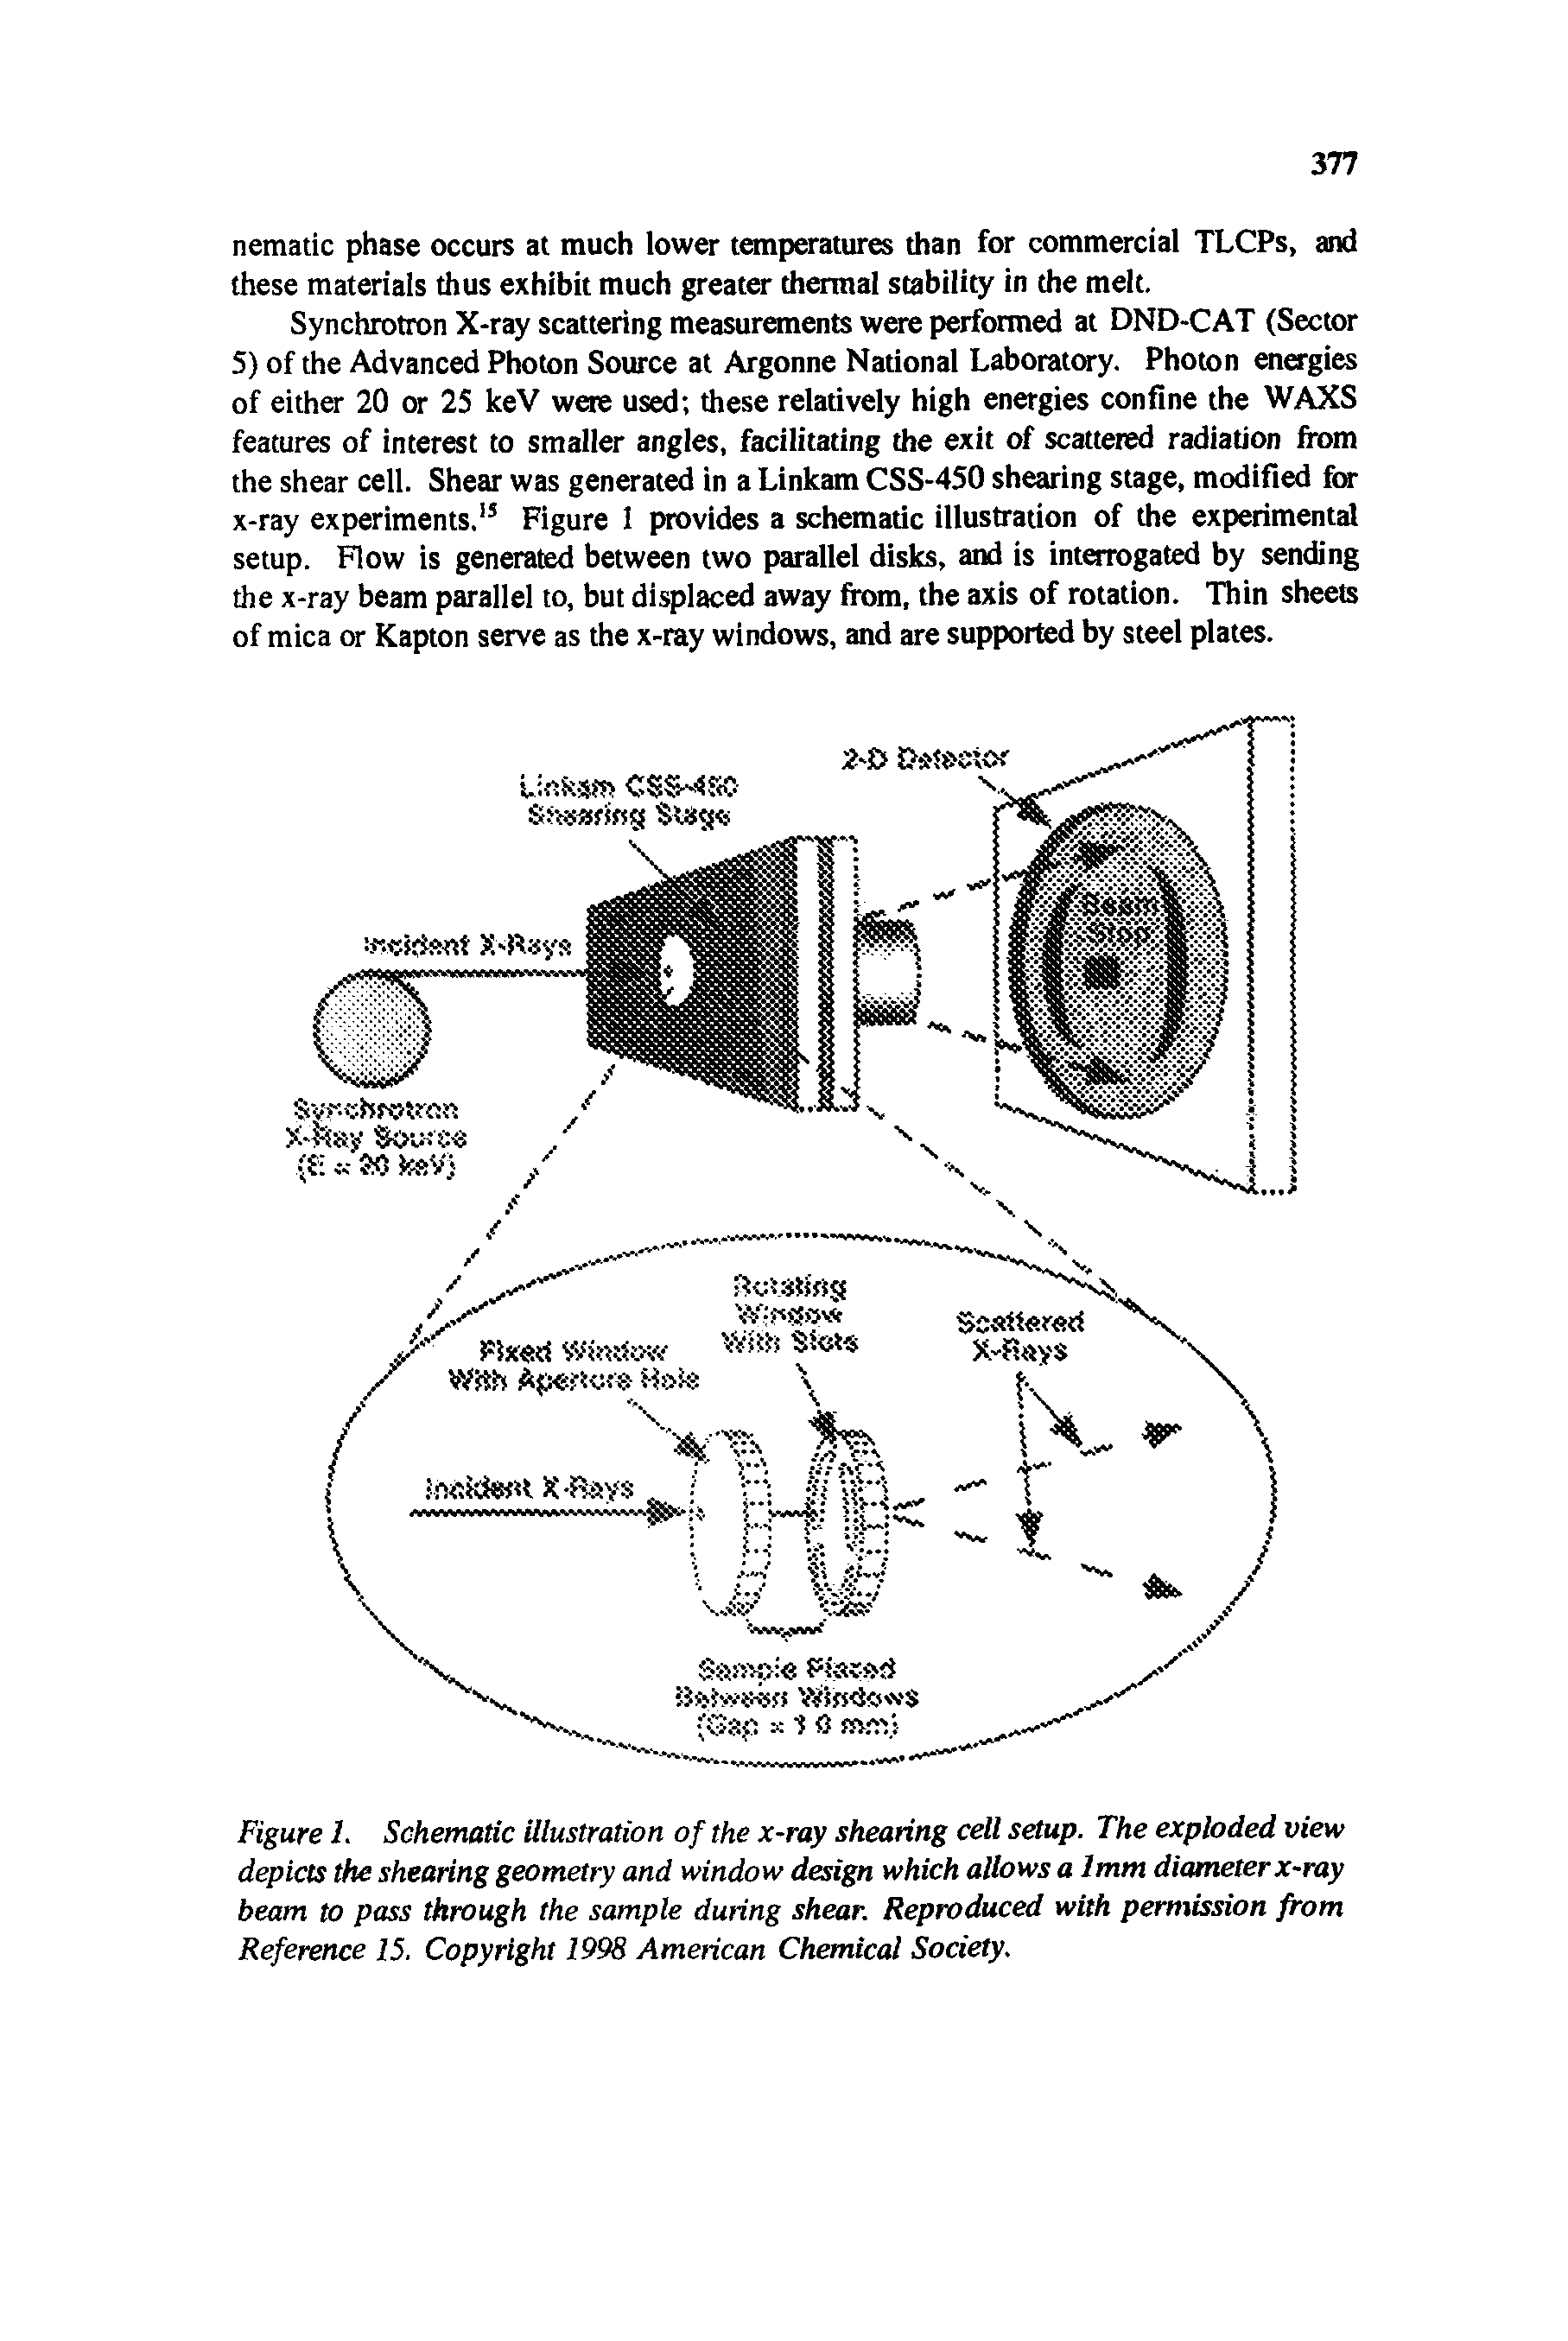 Figure 1. Schematic illustration of the x-ray shearing cell setup. The exploded view depicts the shearing geometry and window design which allows a 1mm diameter x-ray beam to pass through the sample during shear. Reproduced with permission from Reference 15. Copyright 1998 American Chemical Society.